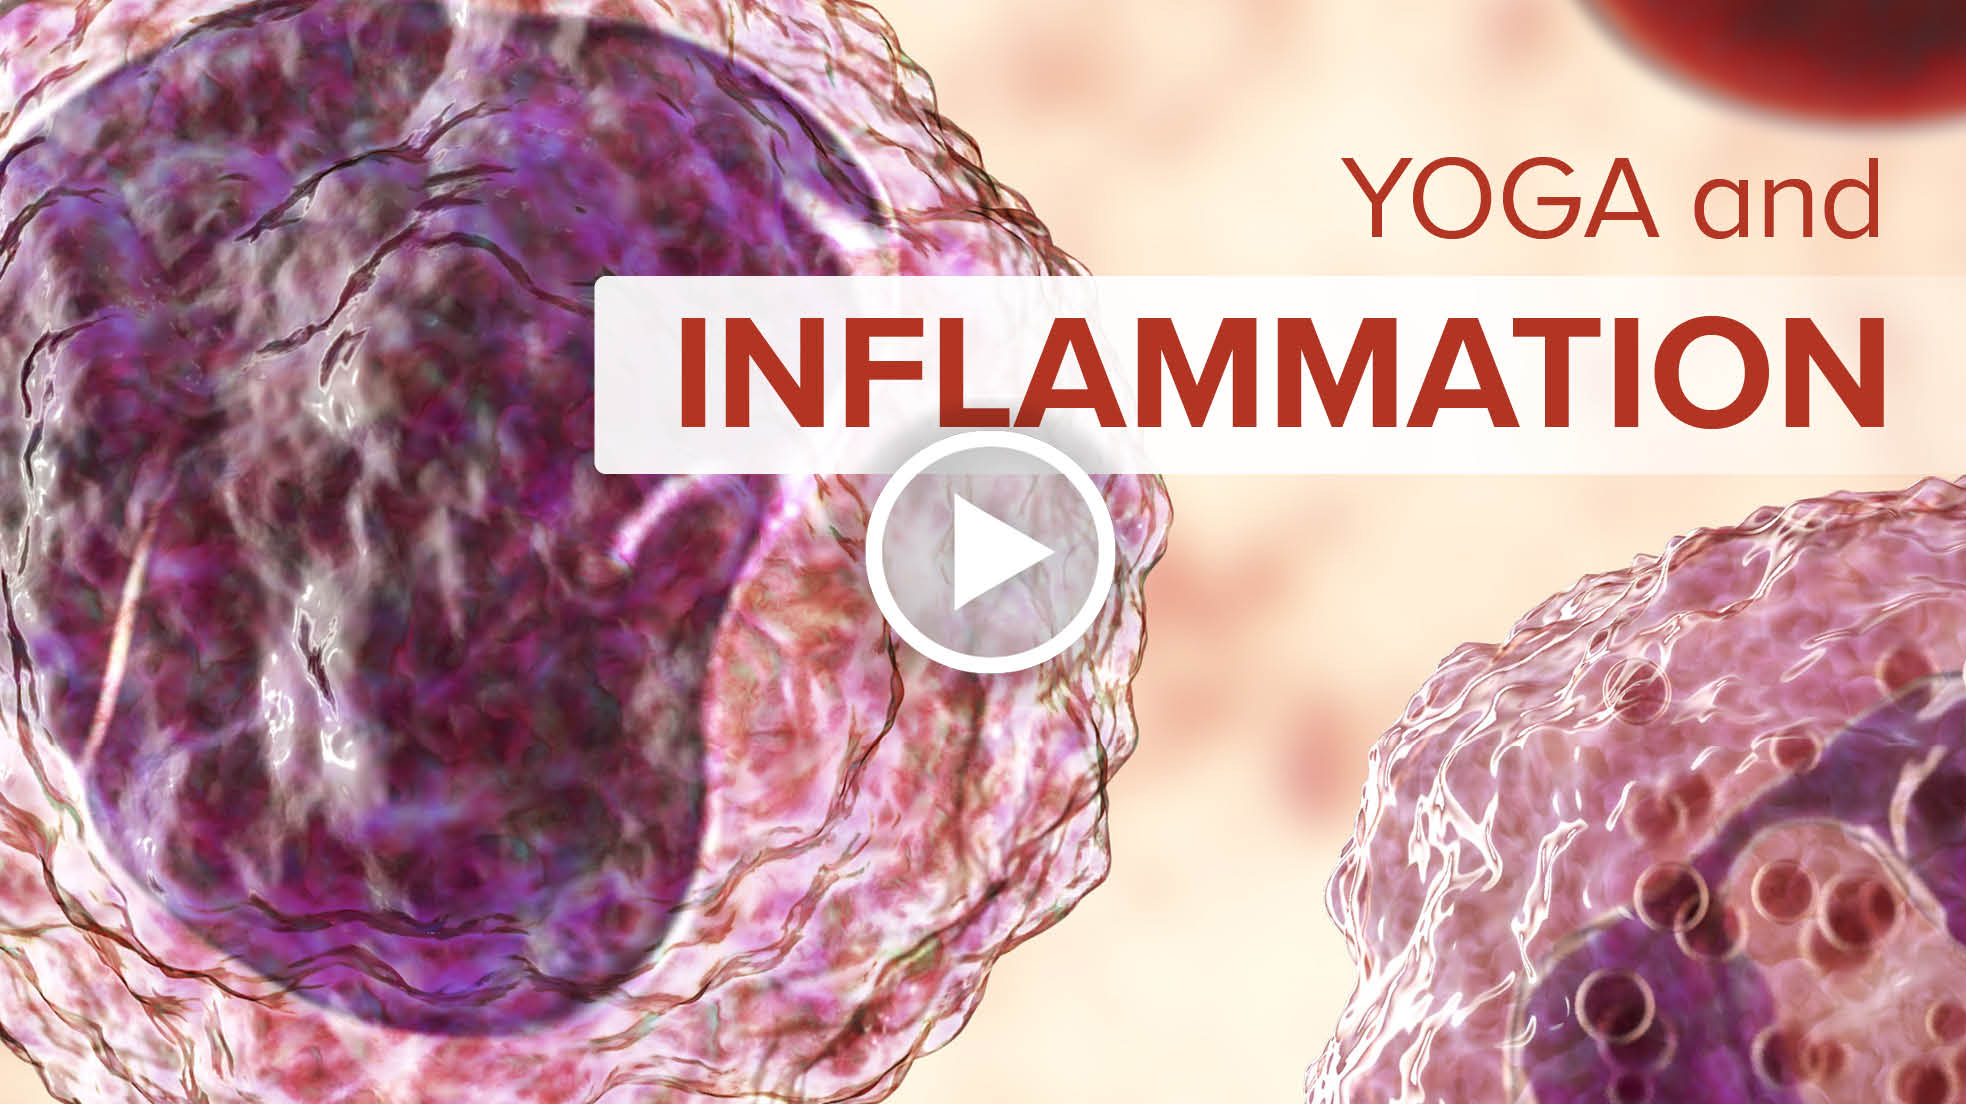 Yoga and Inflammation